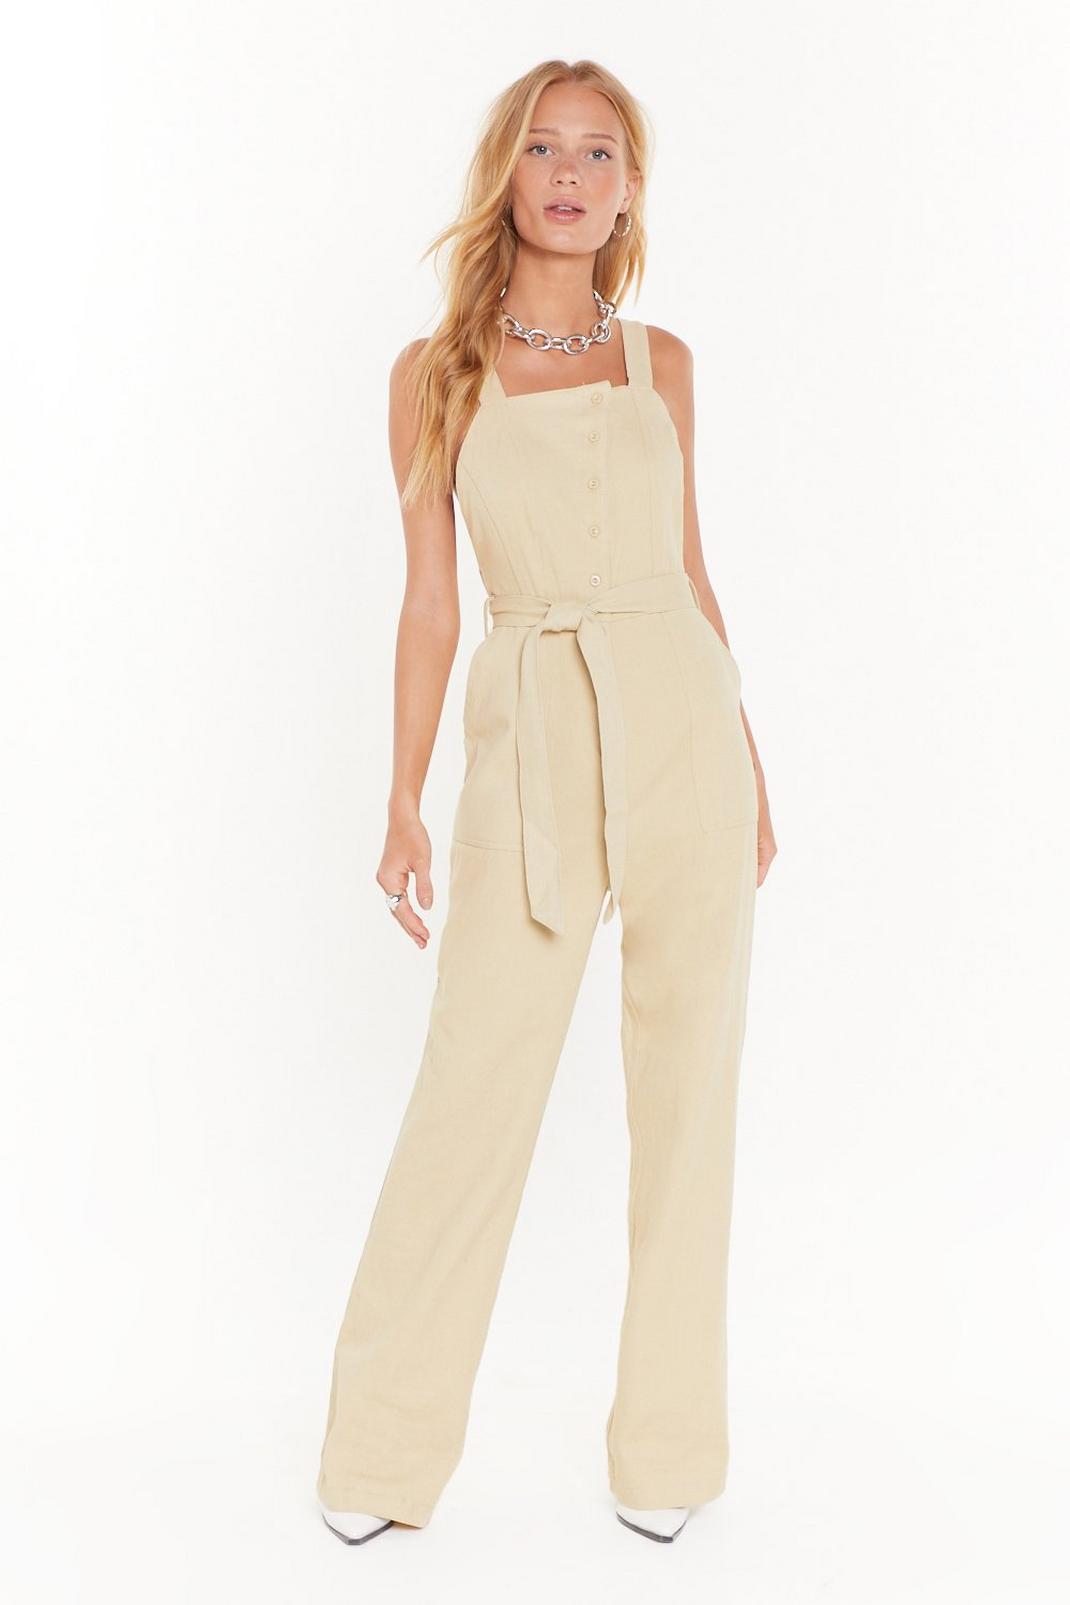 Button Front Wide Leg Romper Dungaree